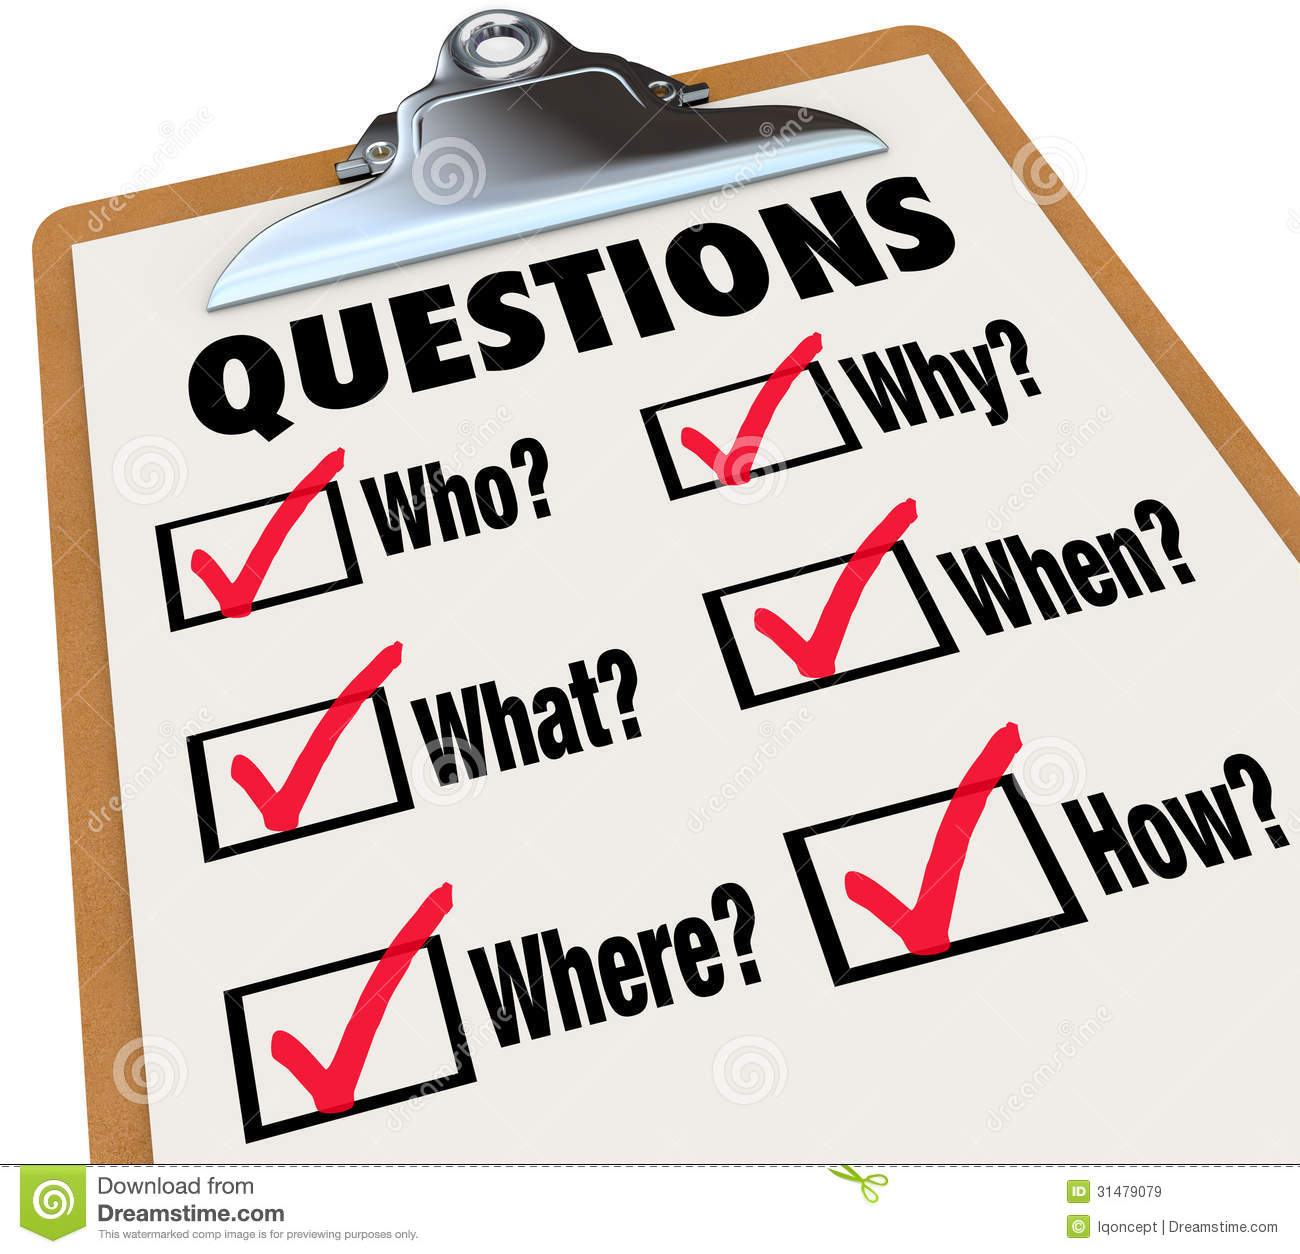 Survey With Reserach Questions Who What Where When Why How And